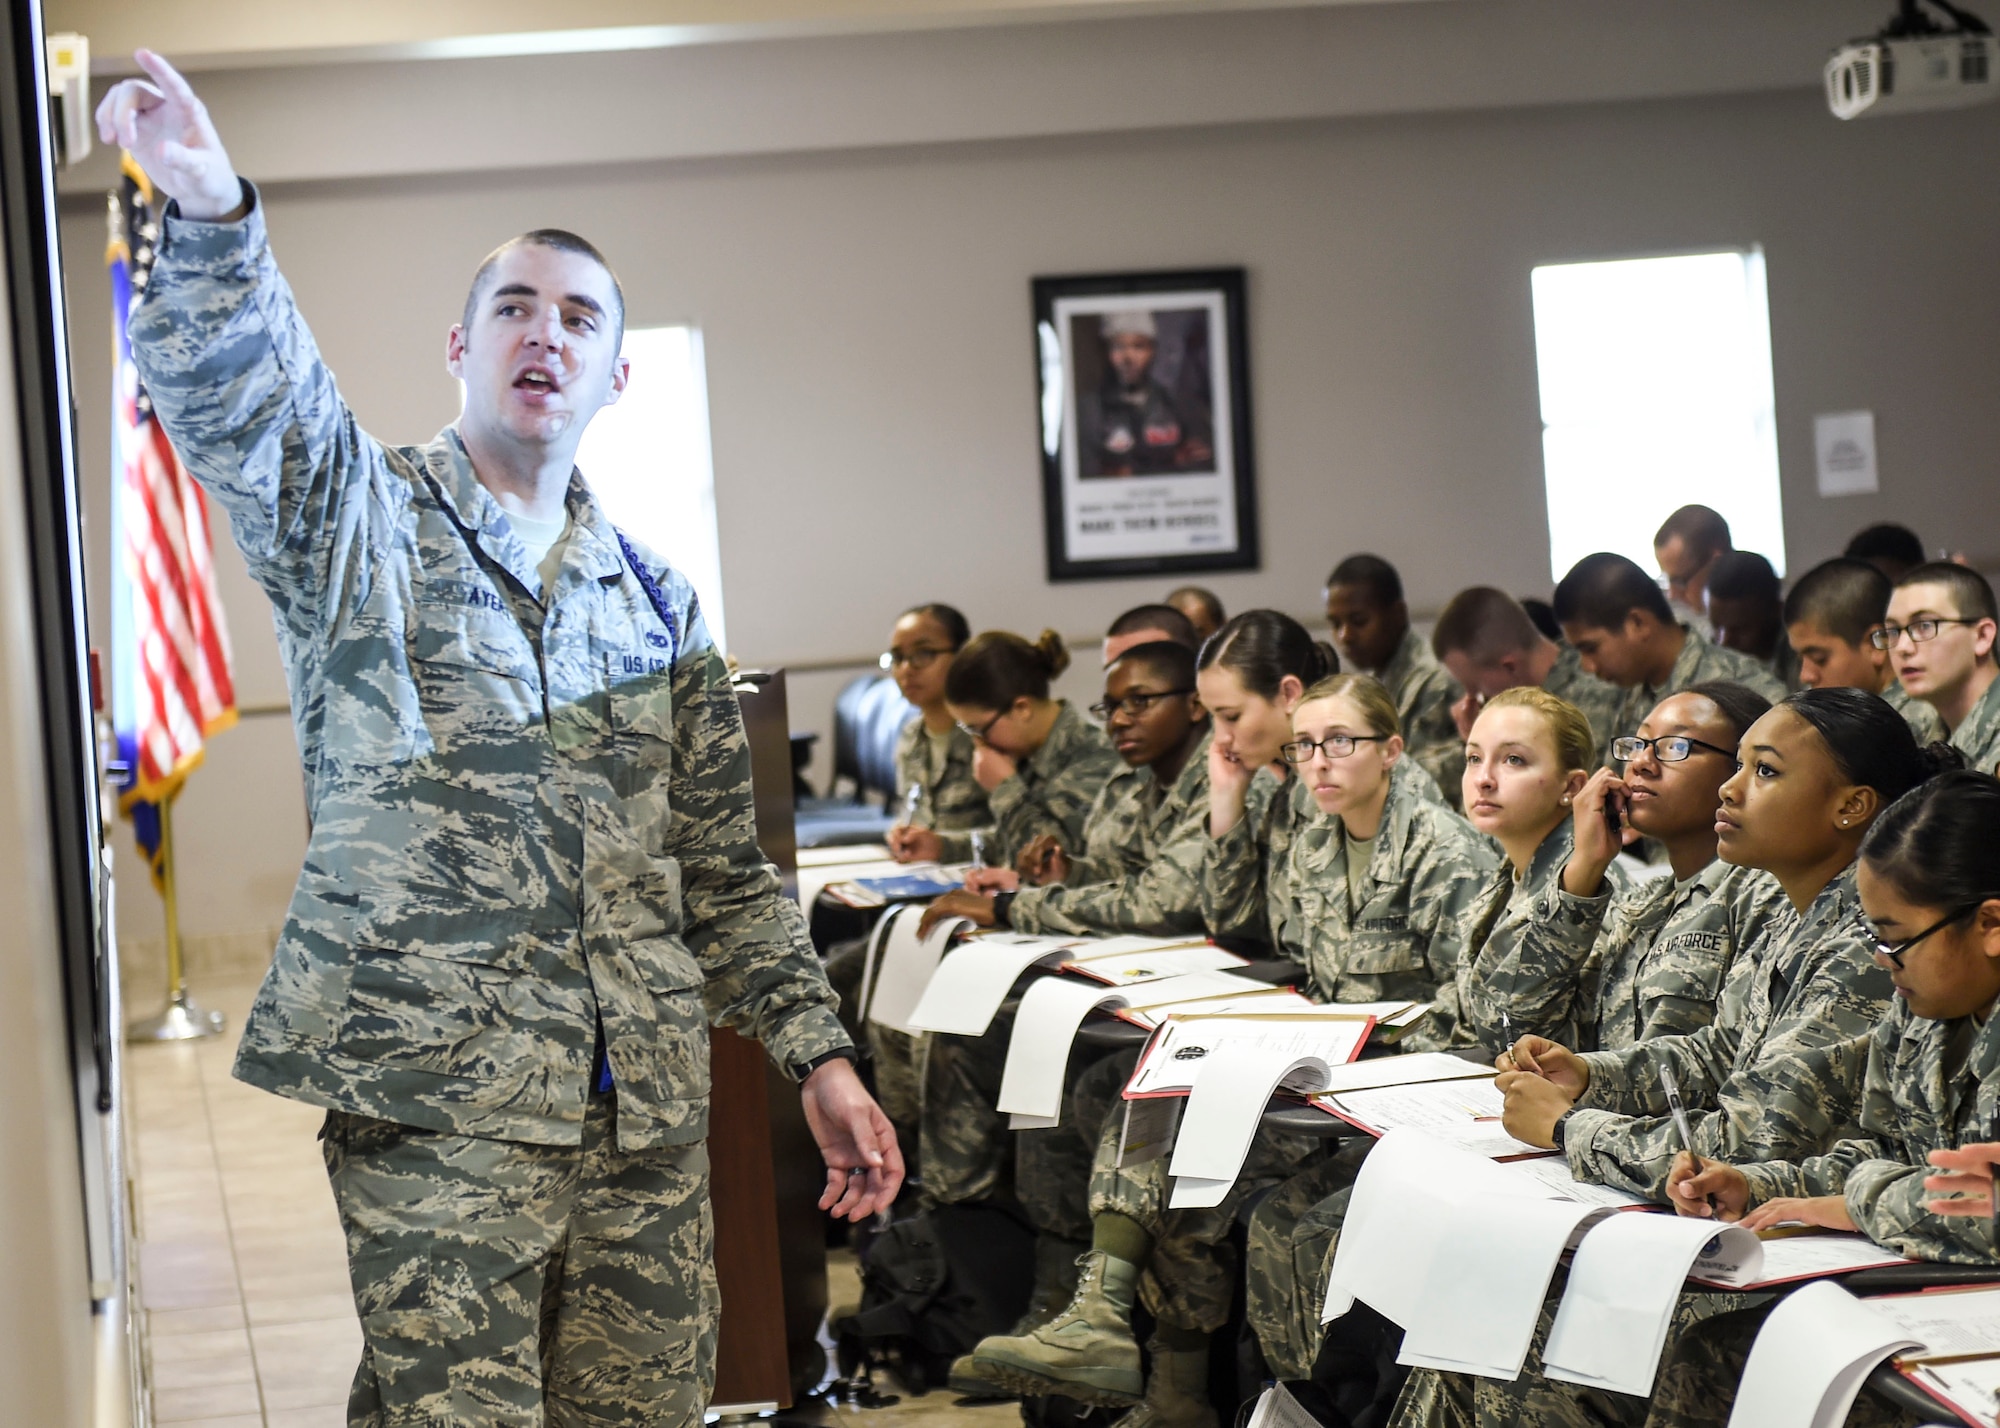 Staff Sgt. Joshua Ayers, 59th Training Group military training leader, gives an orientation briefing to new students April 14, 2016, on Joint Base San Antonio-Fort Sam Houston, Texas. The 59th TRG welcomes an average of 80 new technical training students every week. The group was activated on Jan. 4, 2016, when the 59th Medical Wing assumed command of the group from the 37th Training Wing. (U.S. Air Force photo/Staff Sgt. Michael Ellis)